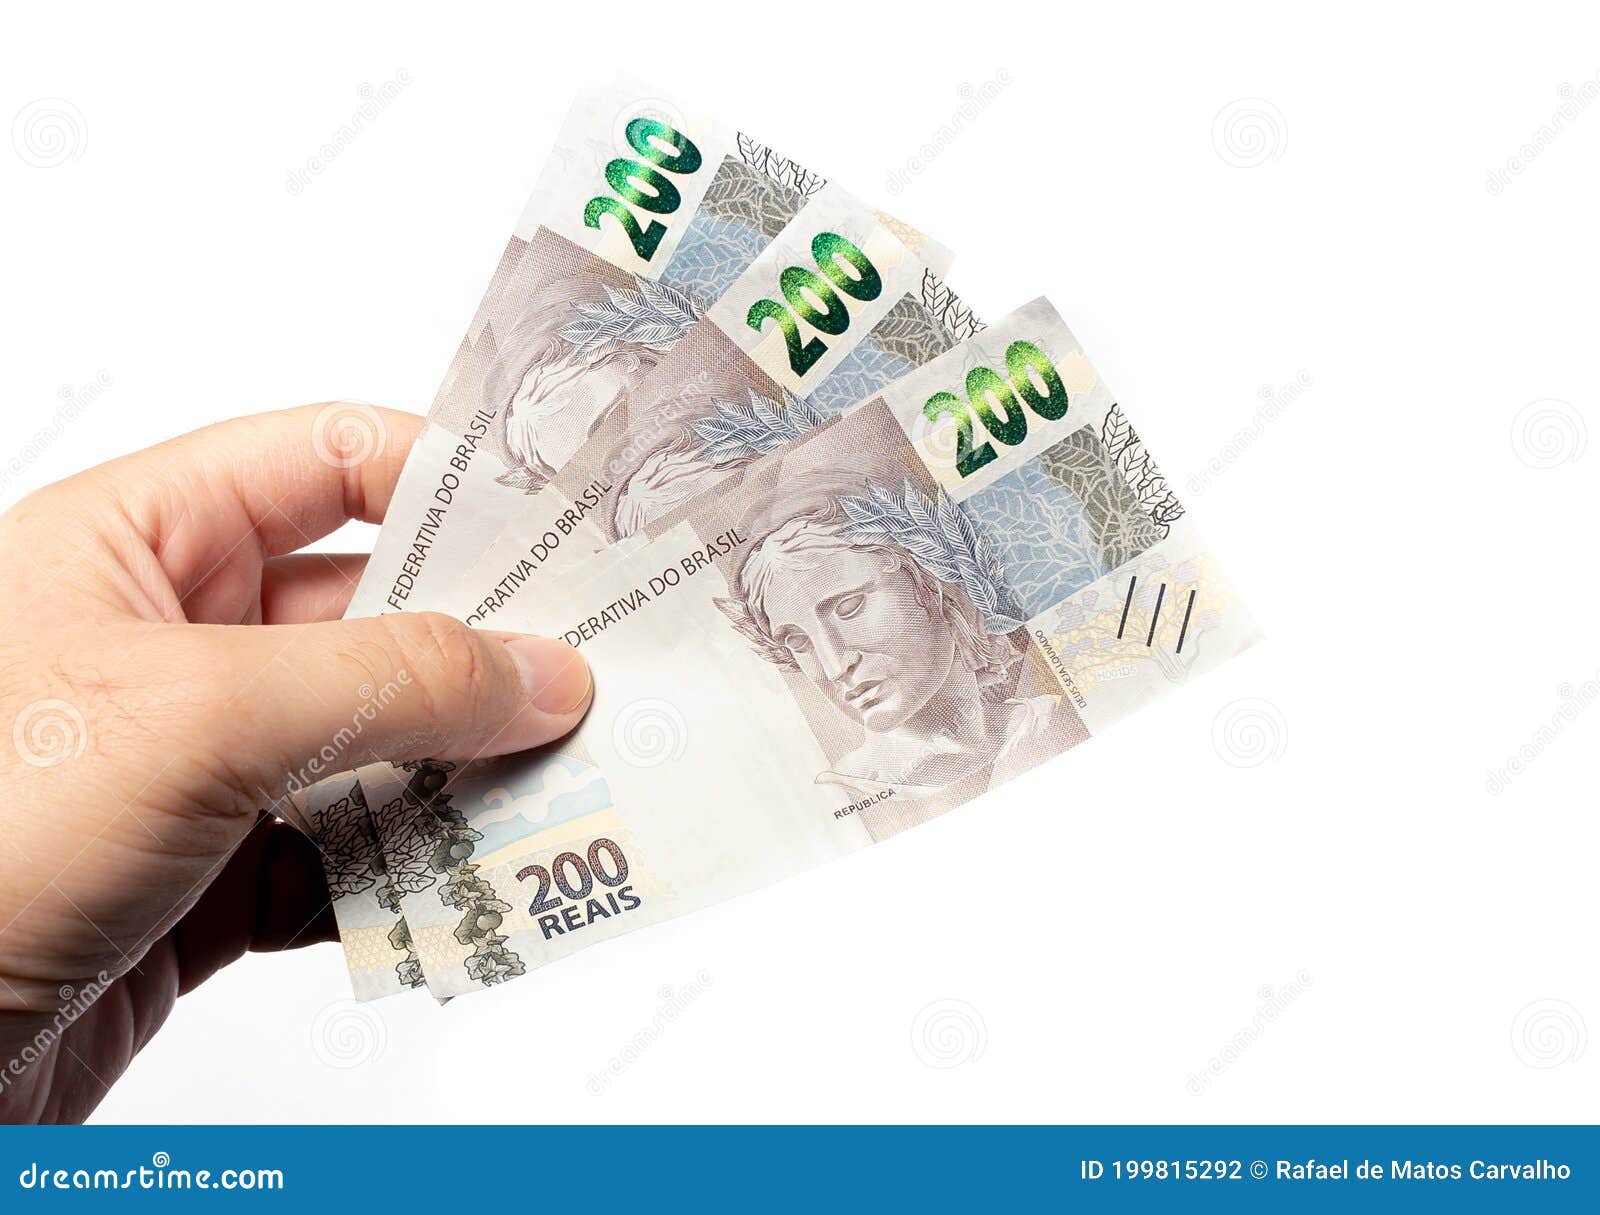 real currency. dinheiro, brasil, reais. banknotes of 200 reais.